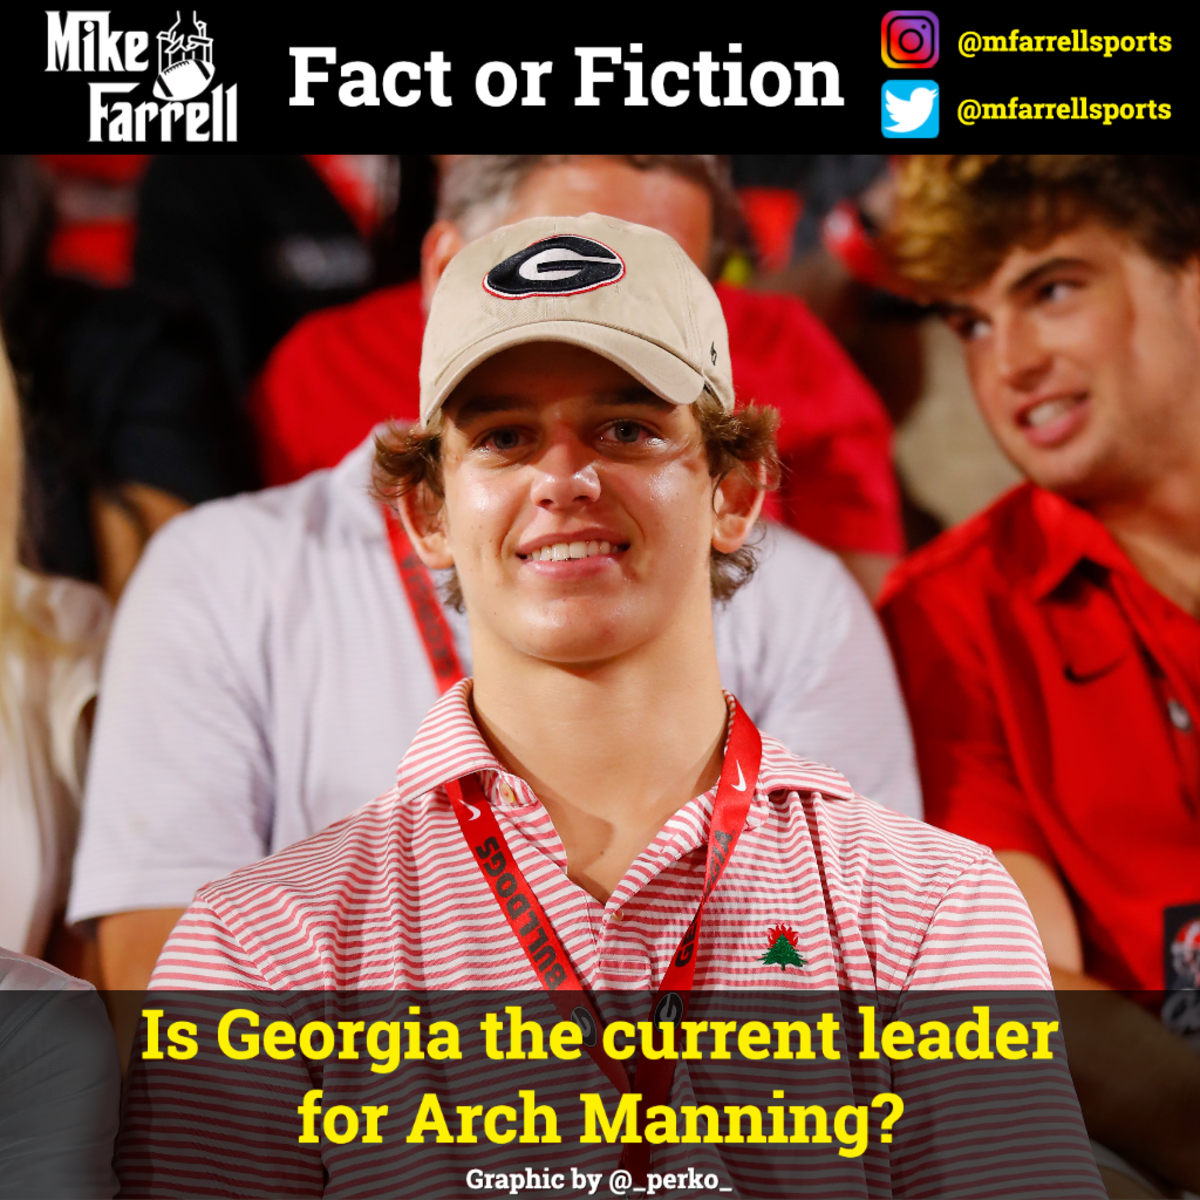 Fact or Fiction - Arch Manning